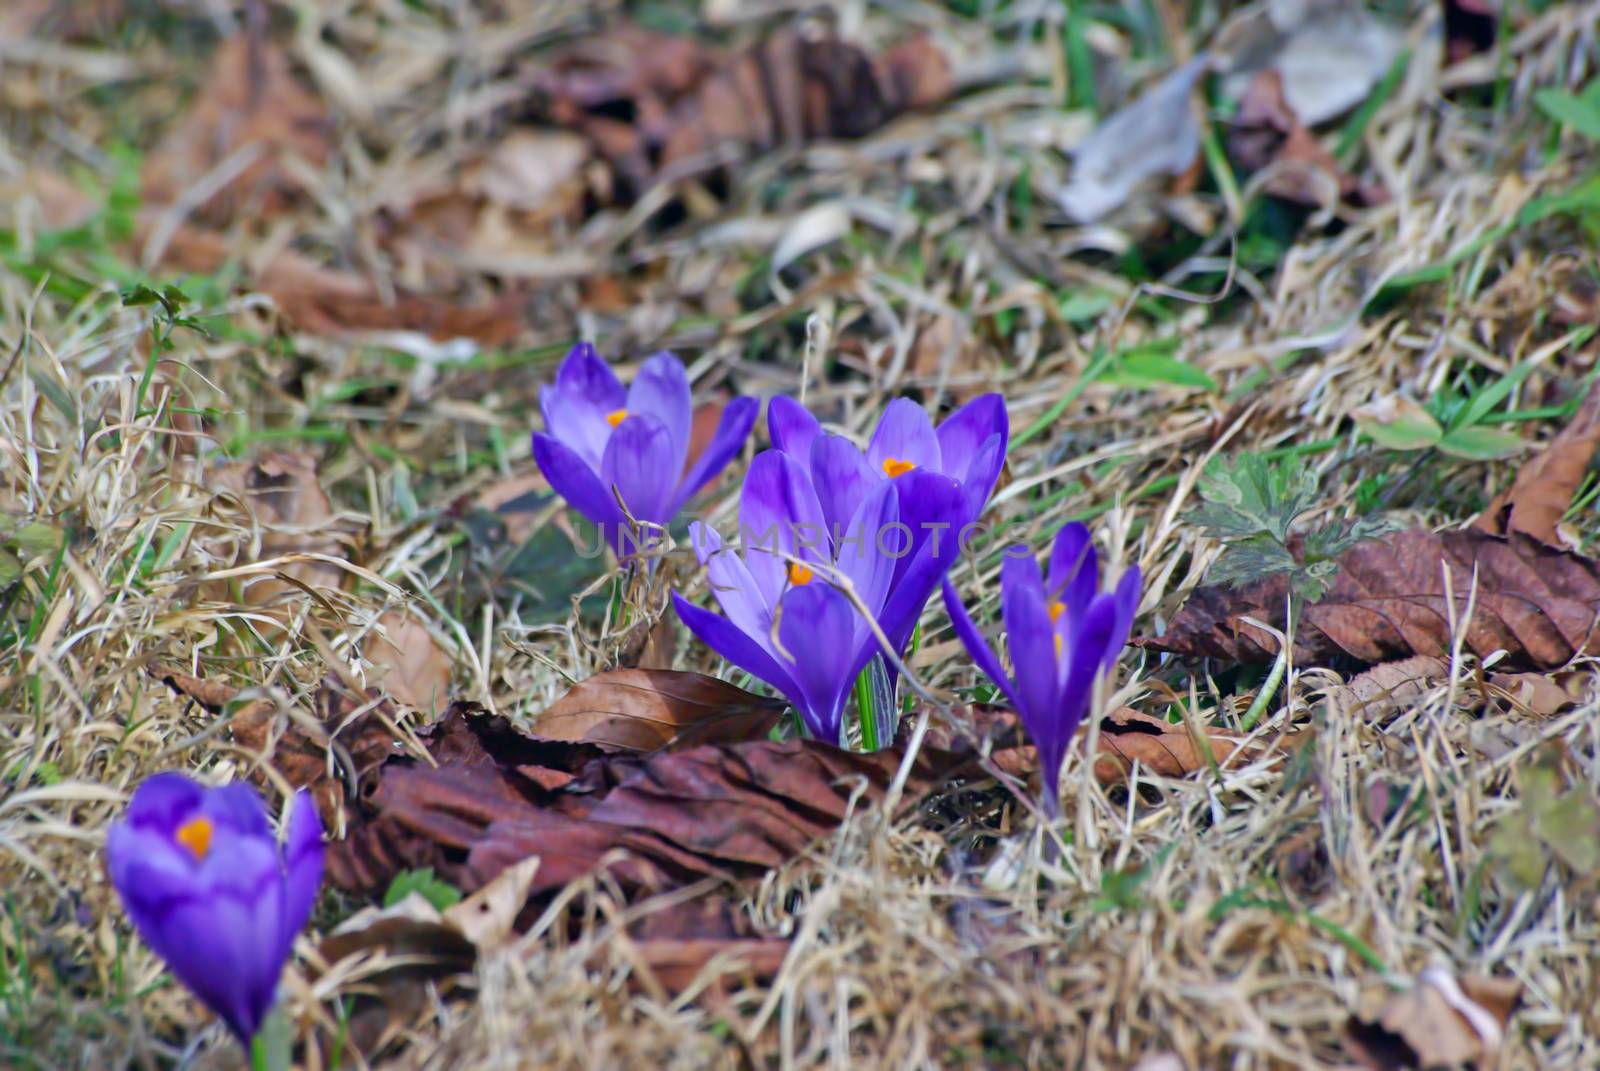 Close up image of early spring crocus flower